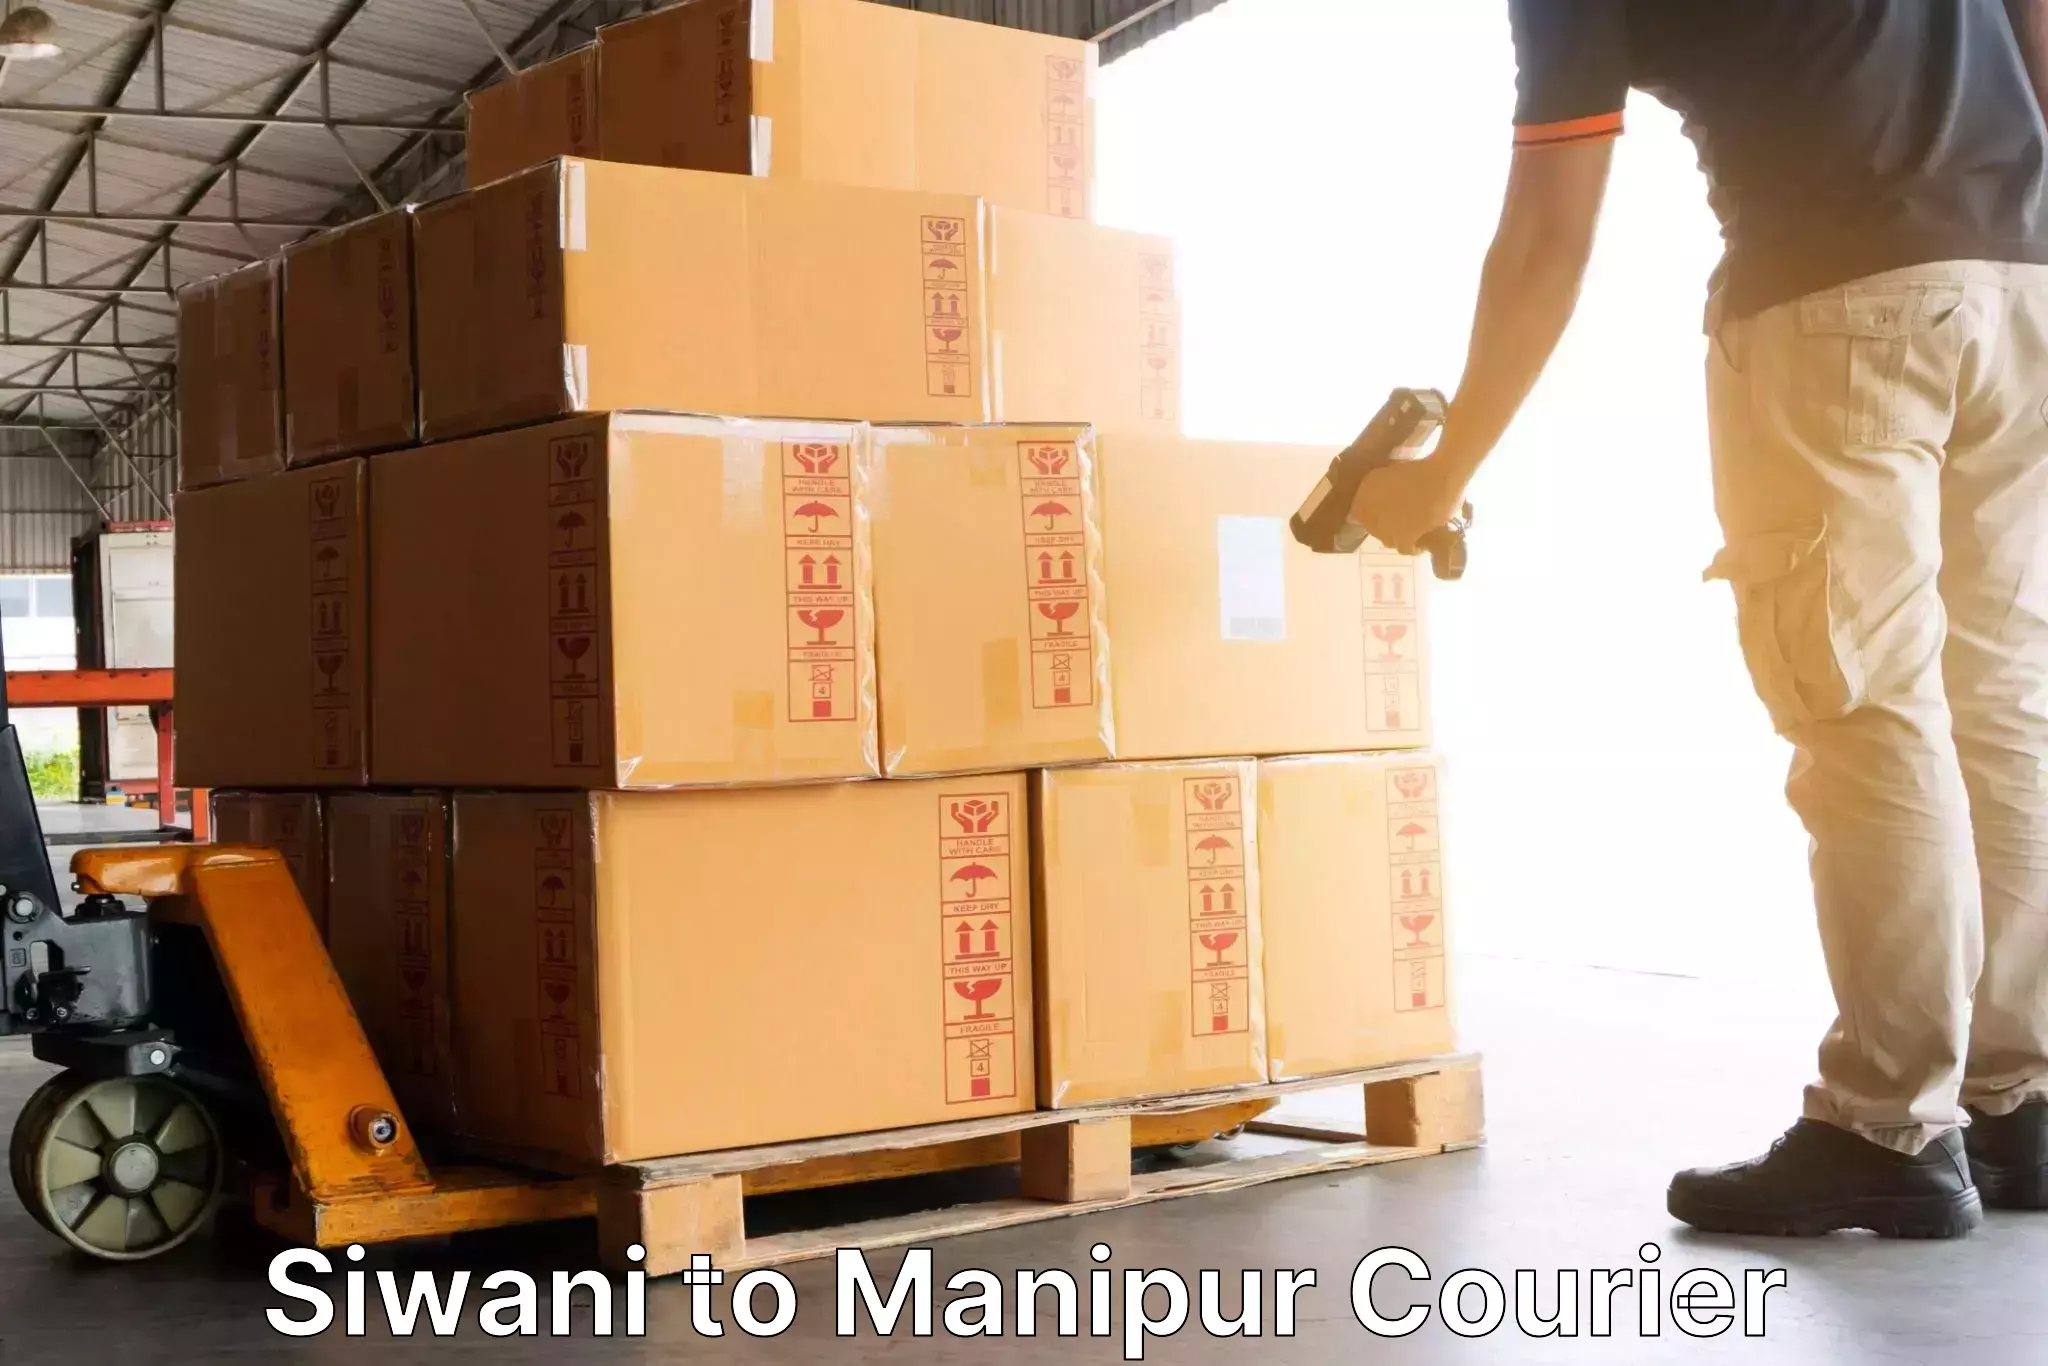 Courier service innovation Siwani to Manipur